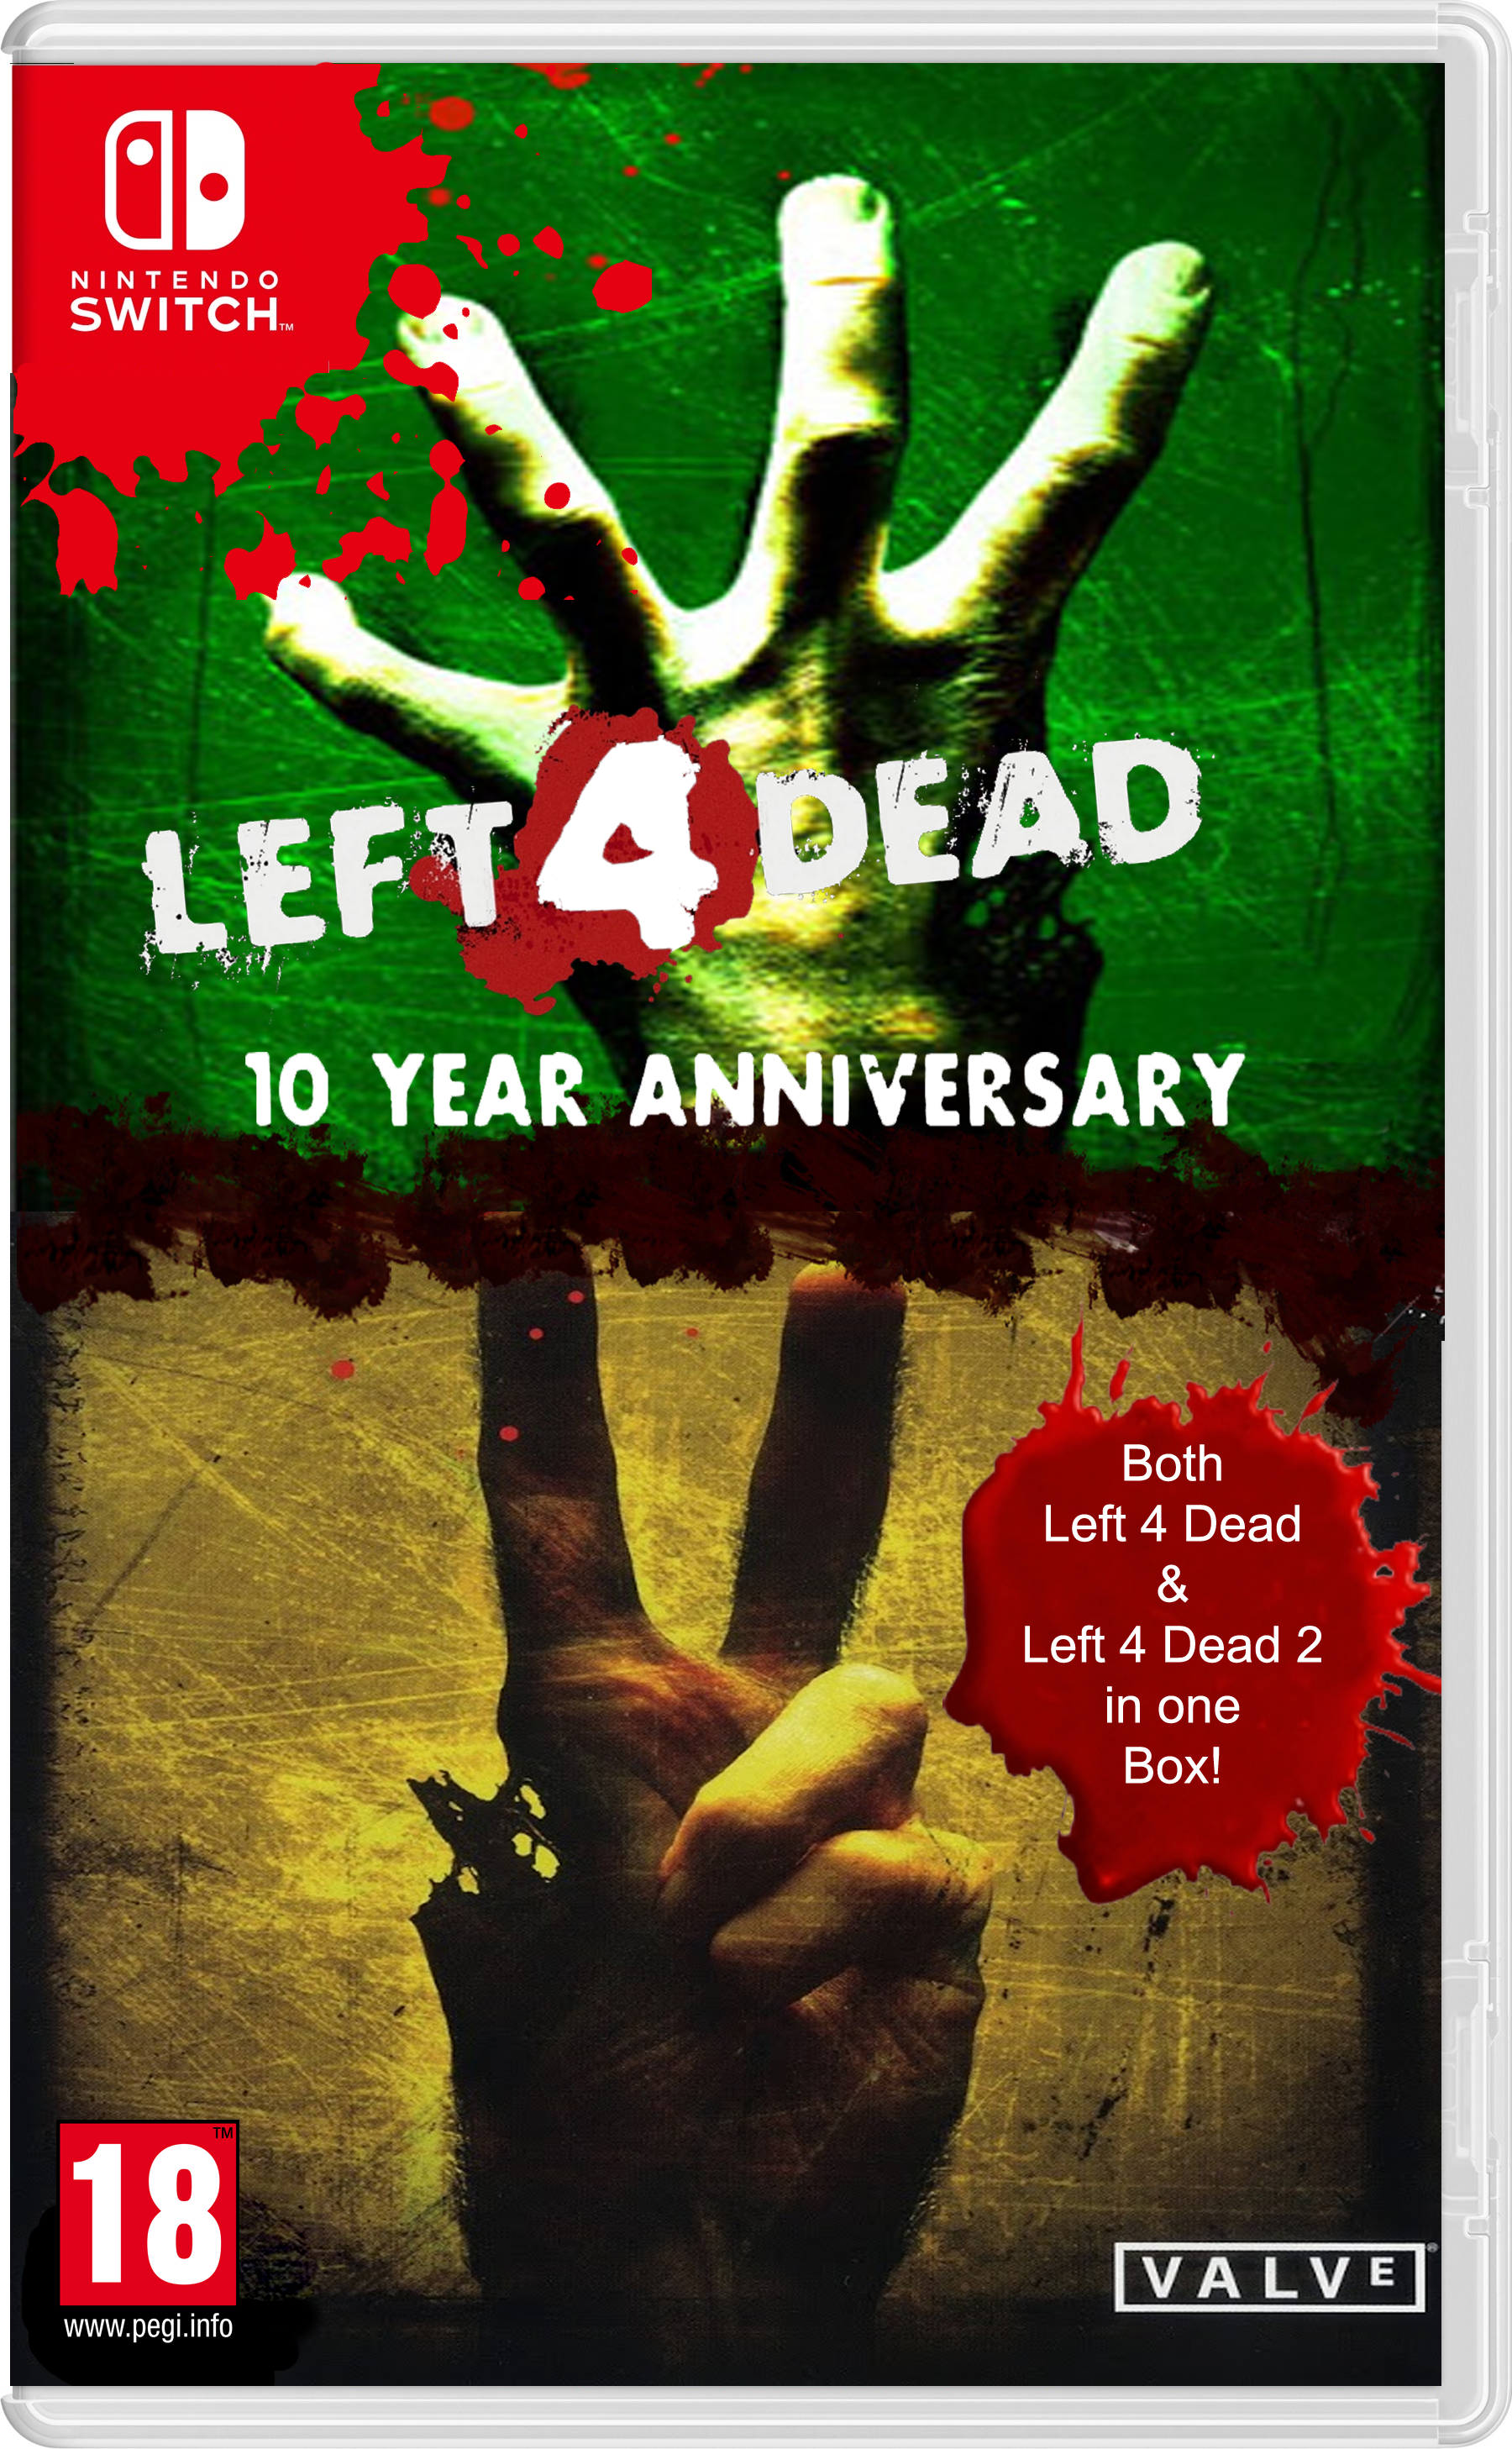 Left 4 Dead 10th Aanniversary box for Switch box cover